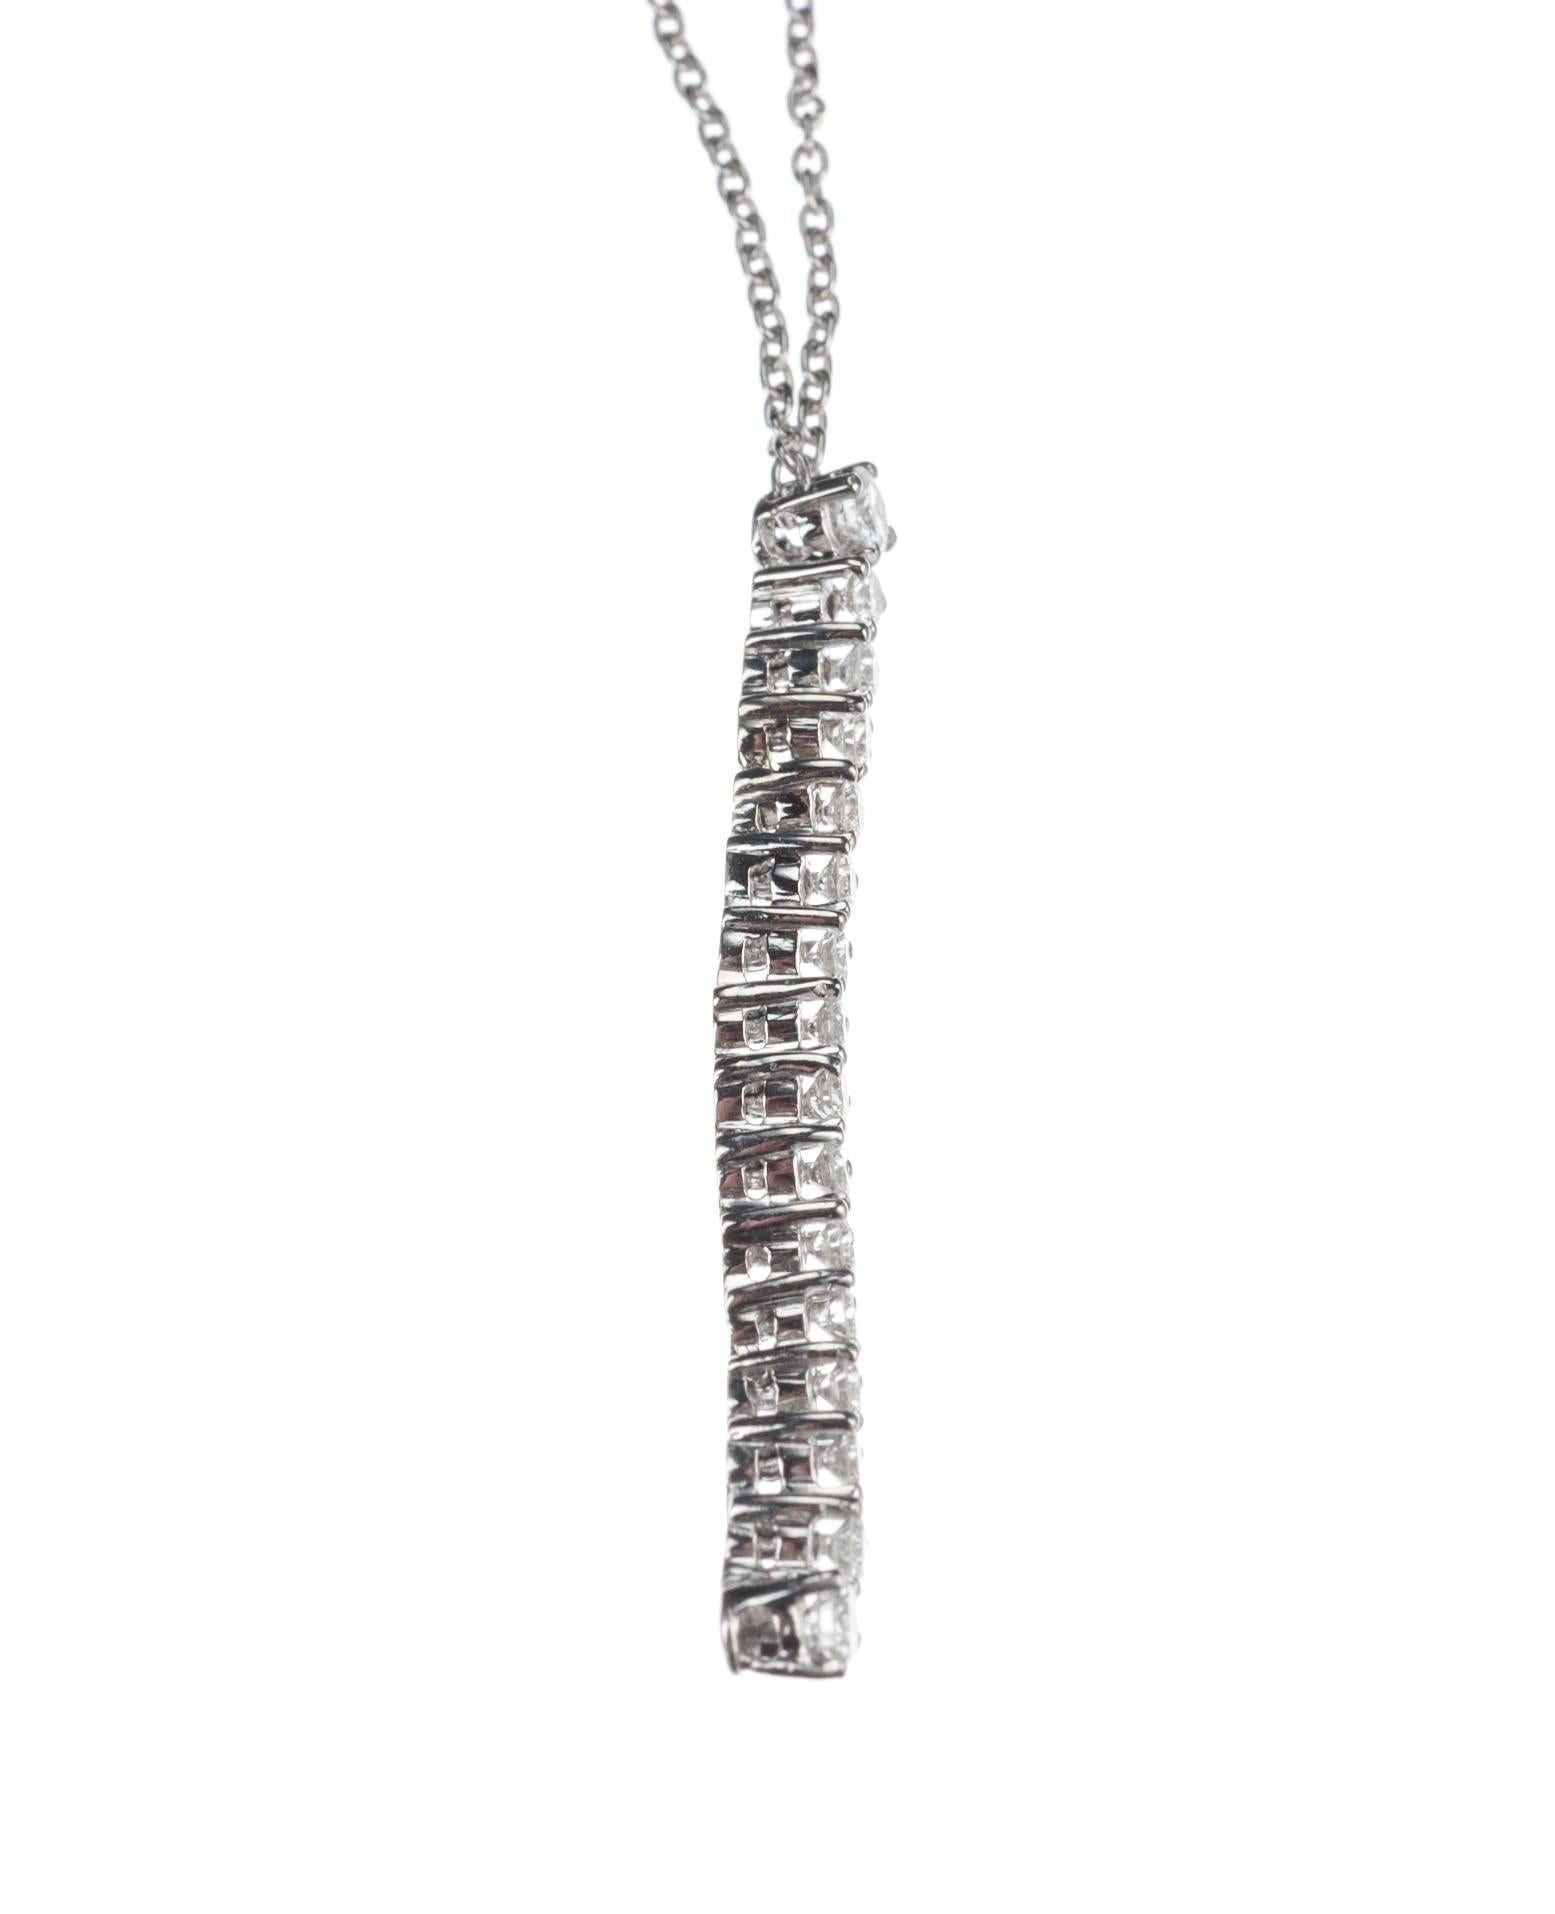 A sinuous, articulated strand of 16 brilliant-cut round diamonds, .64ctw., hangs from its platinum chain as a pendant. The line of diamonds measures approx. 1.5” long while the cable chain measures 16” long.